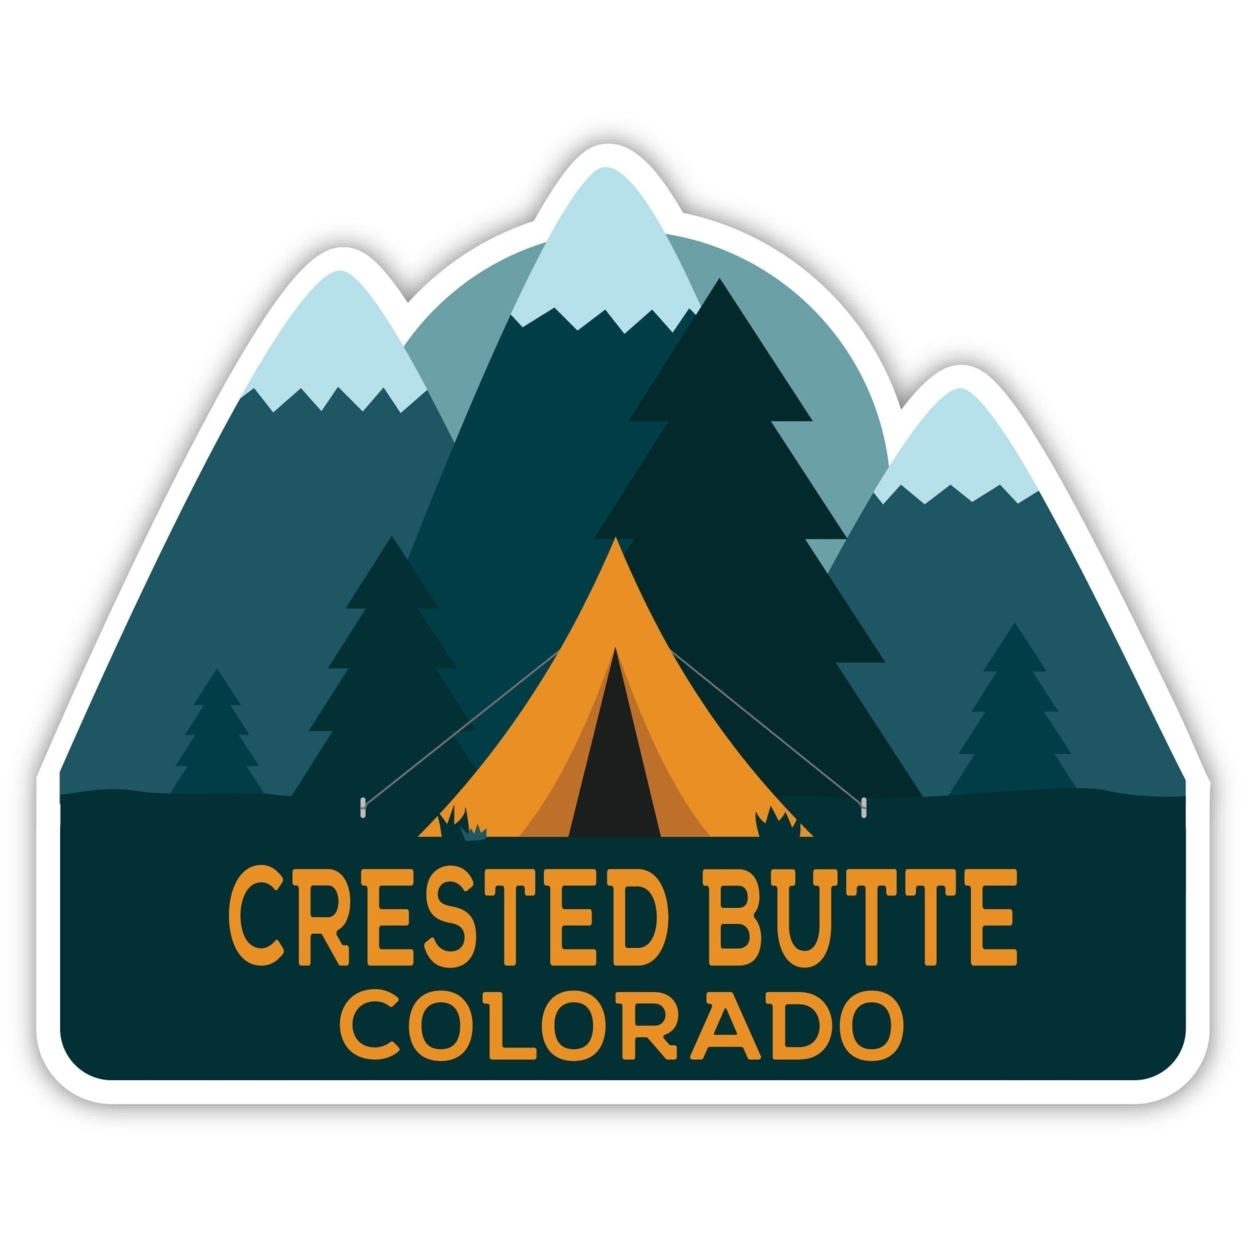 Crested Butte Colorado Souvenir Decorative Stickers (Choose Theme And Size) - 4-Pack, 10-Inch, Tent